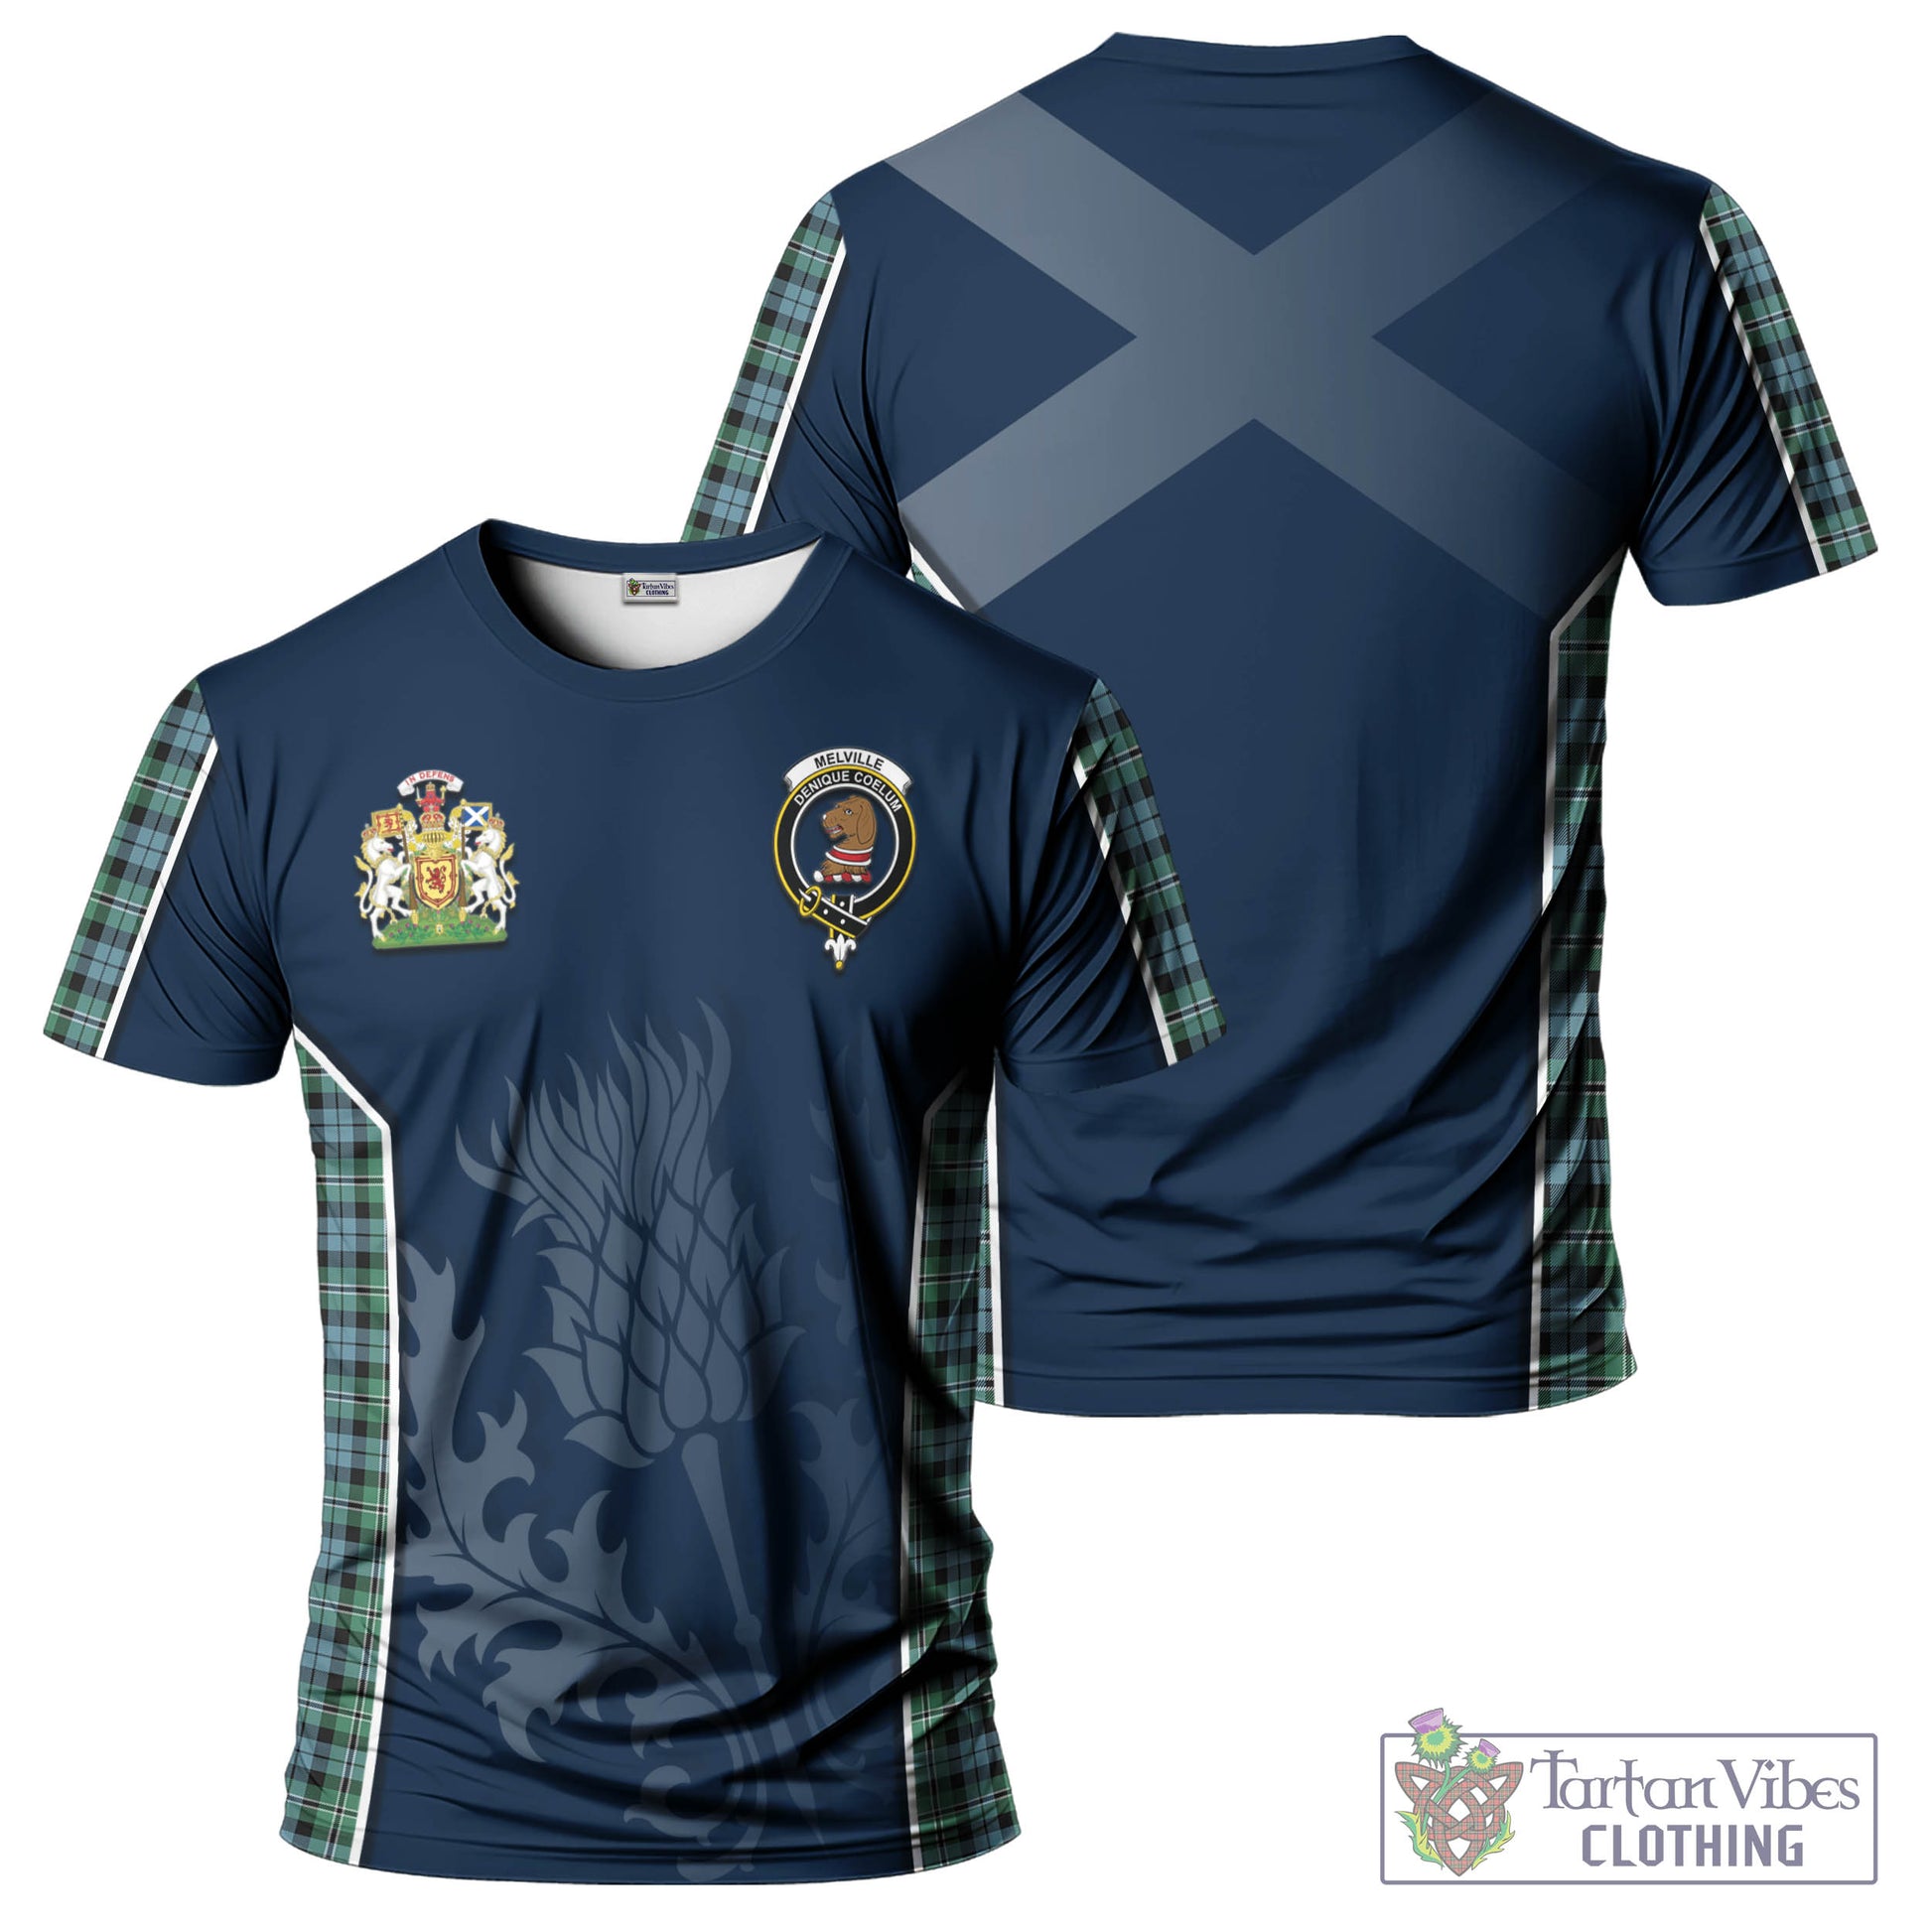 Tartan Vibes Clothing Melville Ancient Tartan T-Shirt with Family Crest and Scottish Thistle Vibes Sport Style